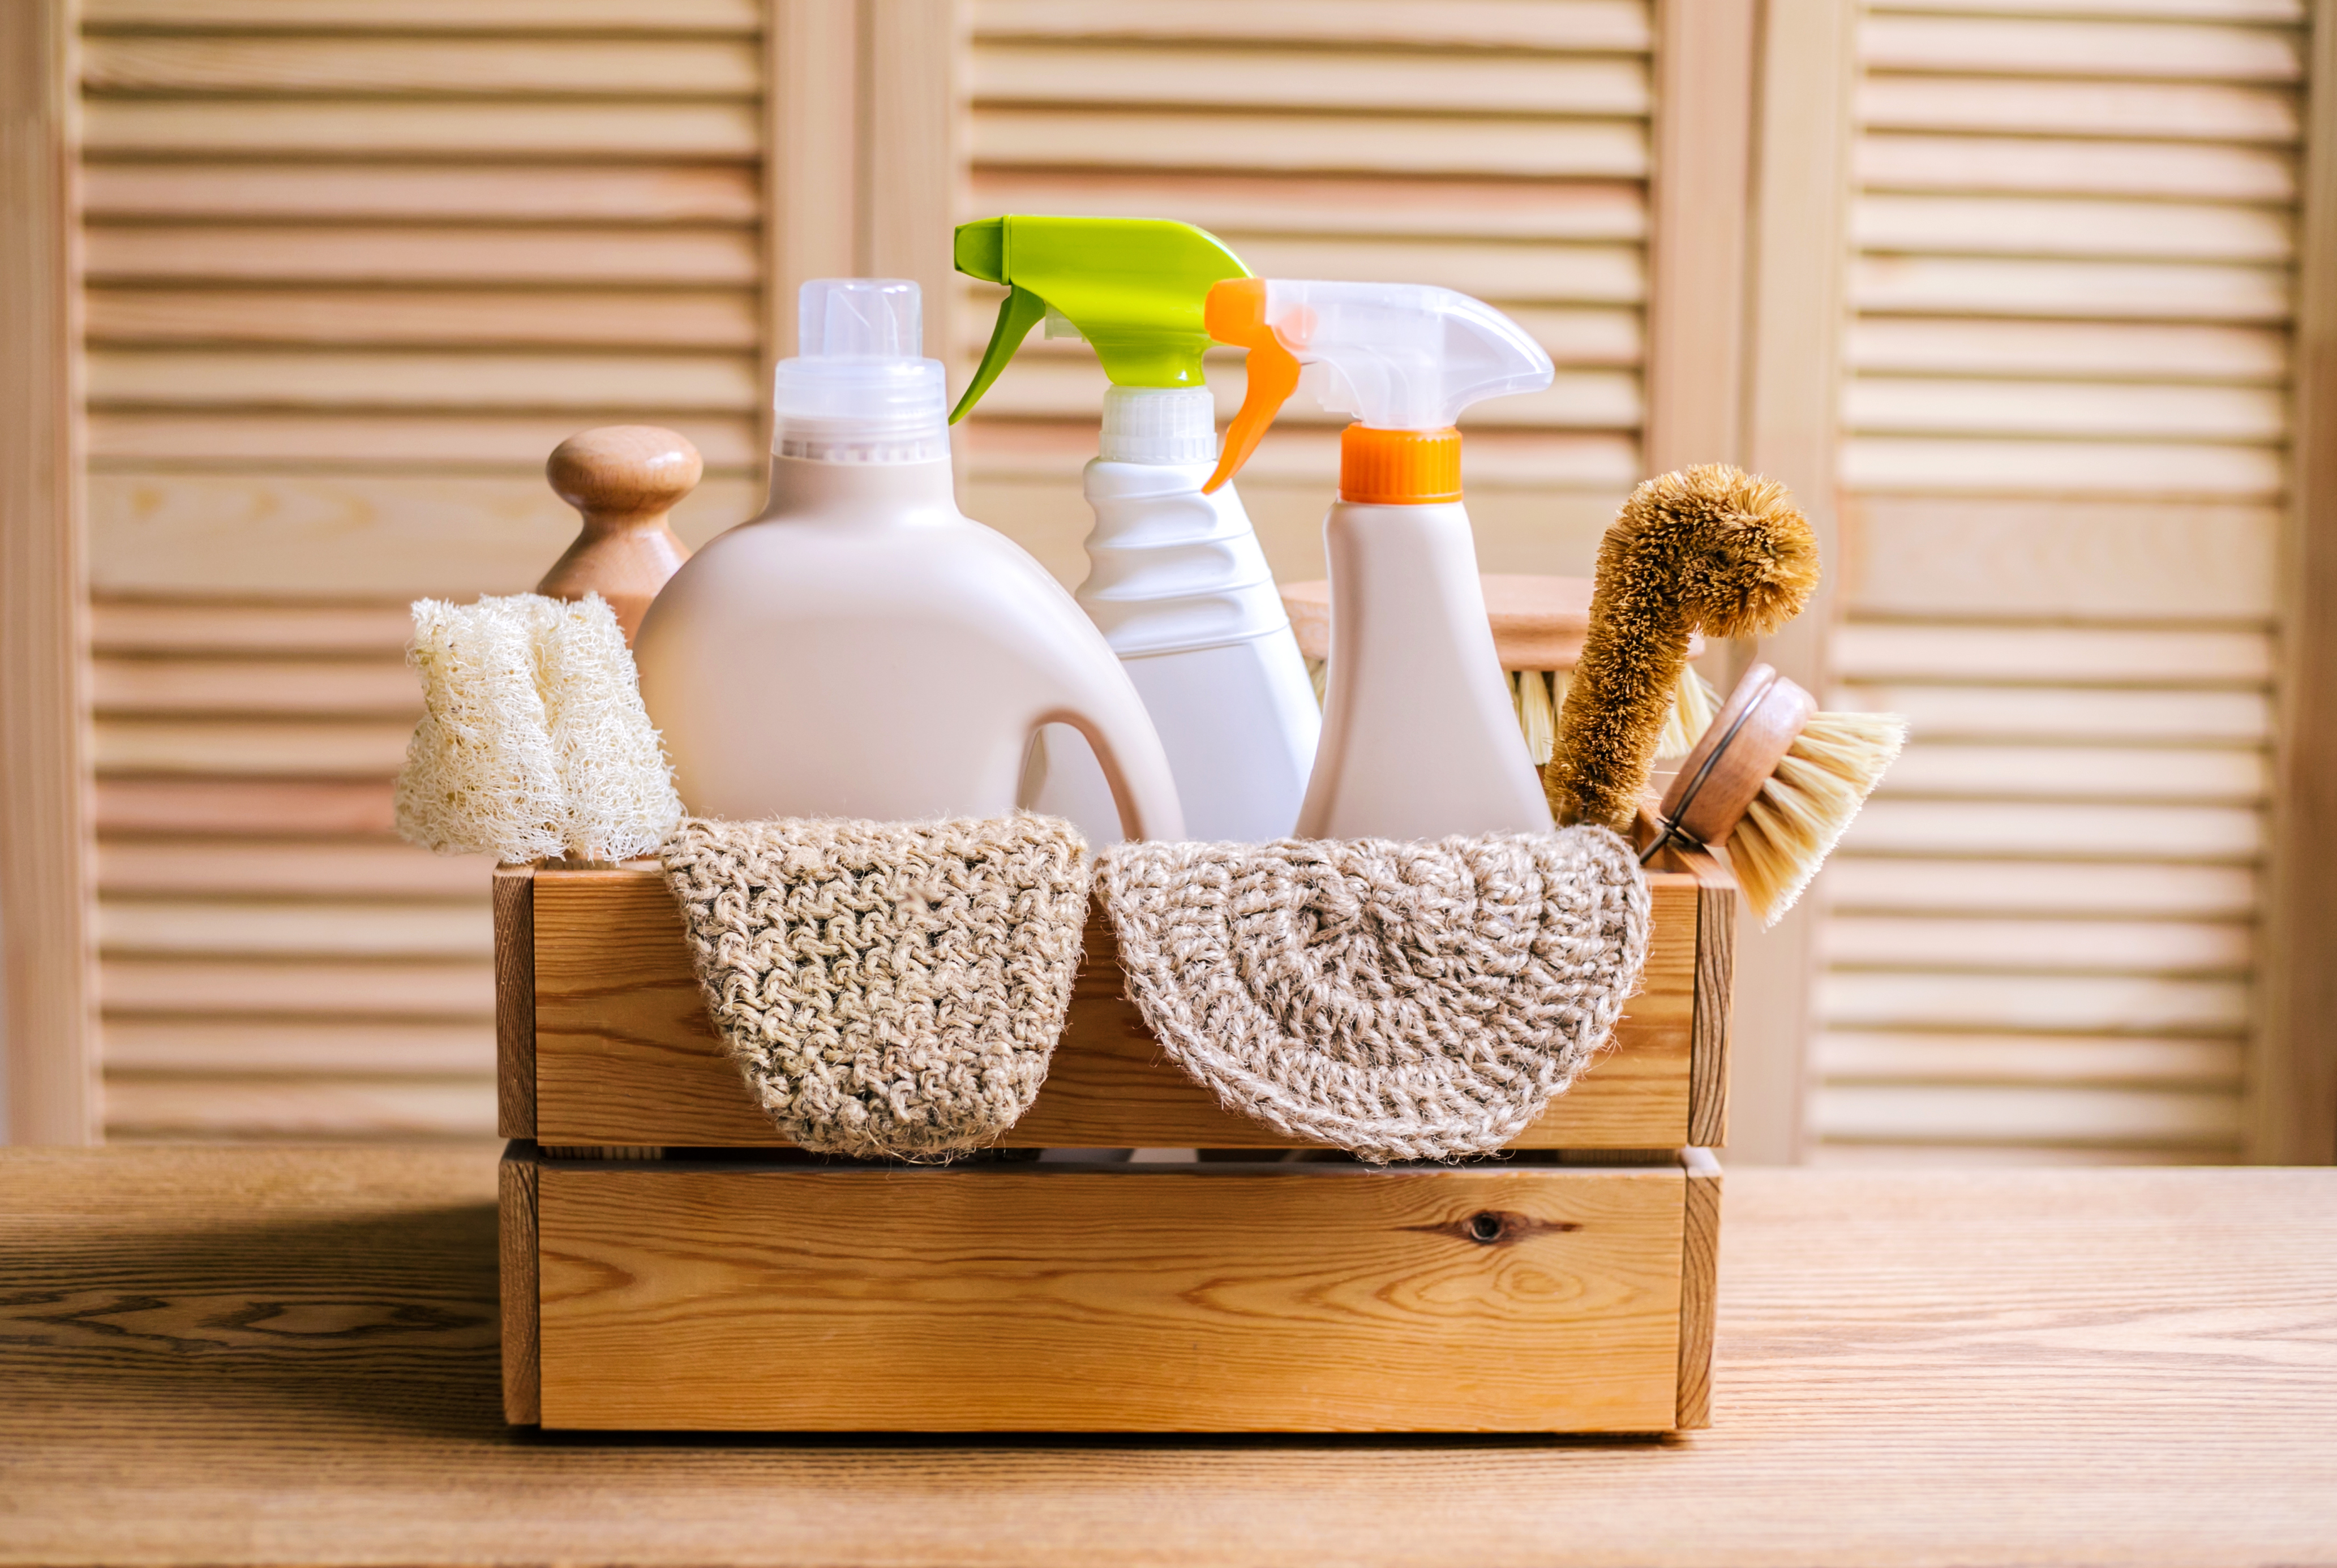 Green Your Cleaning Methods